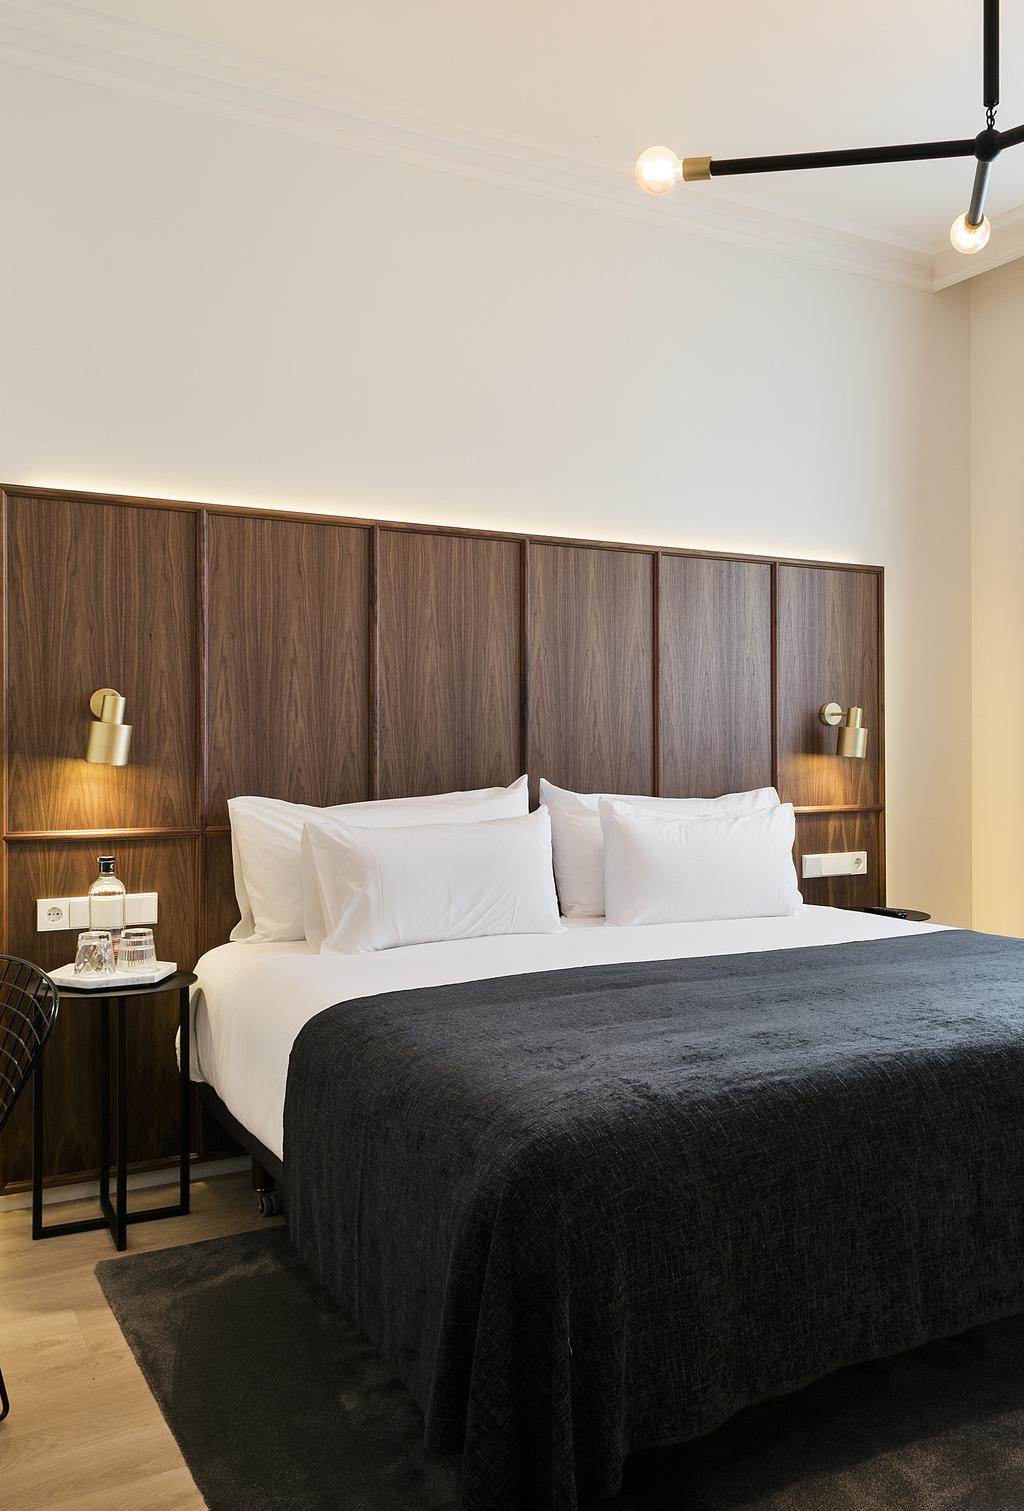 ROOMS THAT SPEAK OF THE CITY interior design with fine materials (oak, walnut, linen) ) one hundred percent natural.